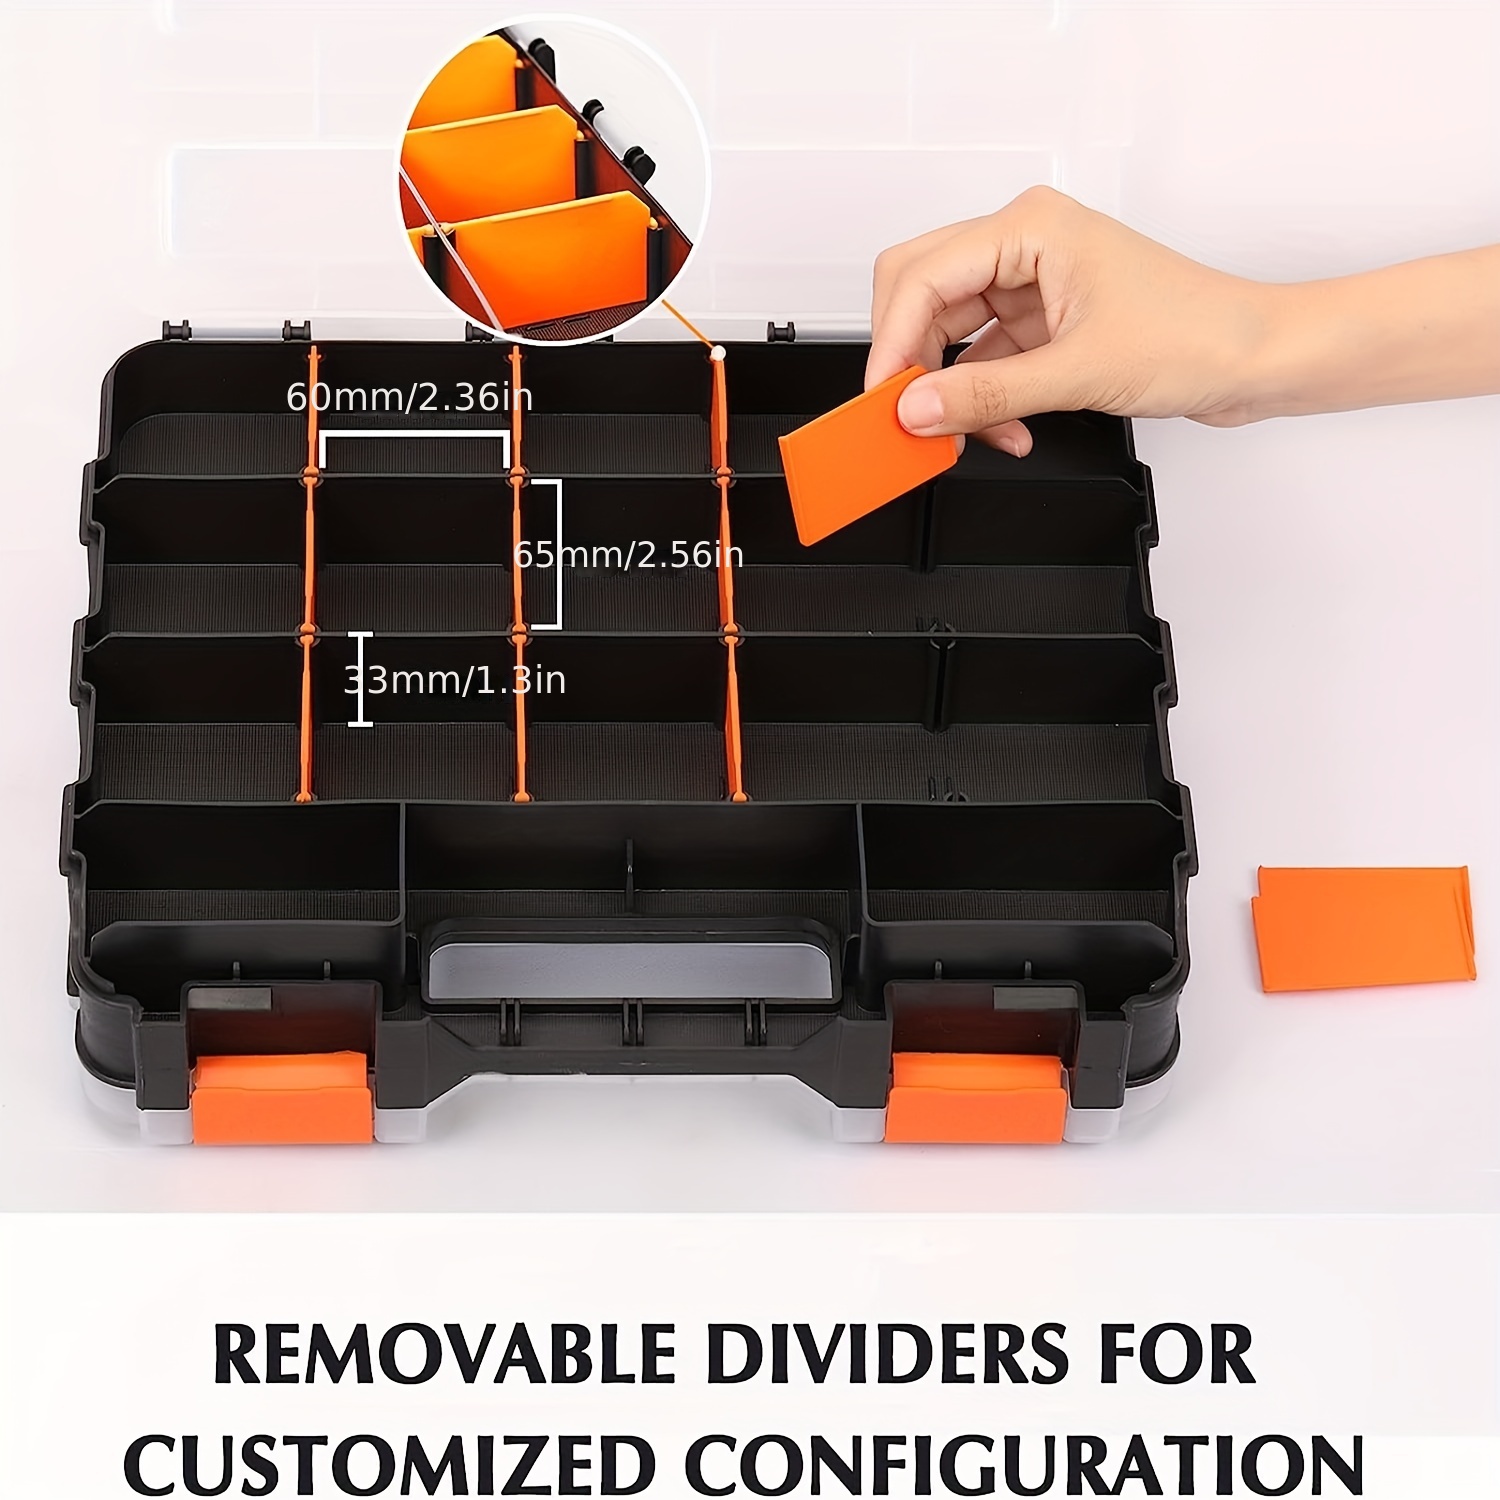 1pc double side tool box organizer hardware storage box portable small parts organizer with removable plastic dividers for screws nuts nails bolts